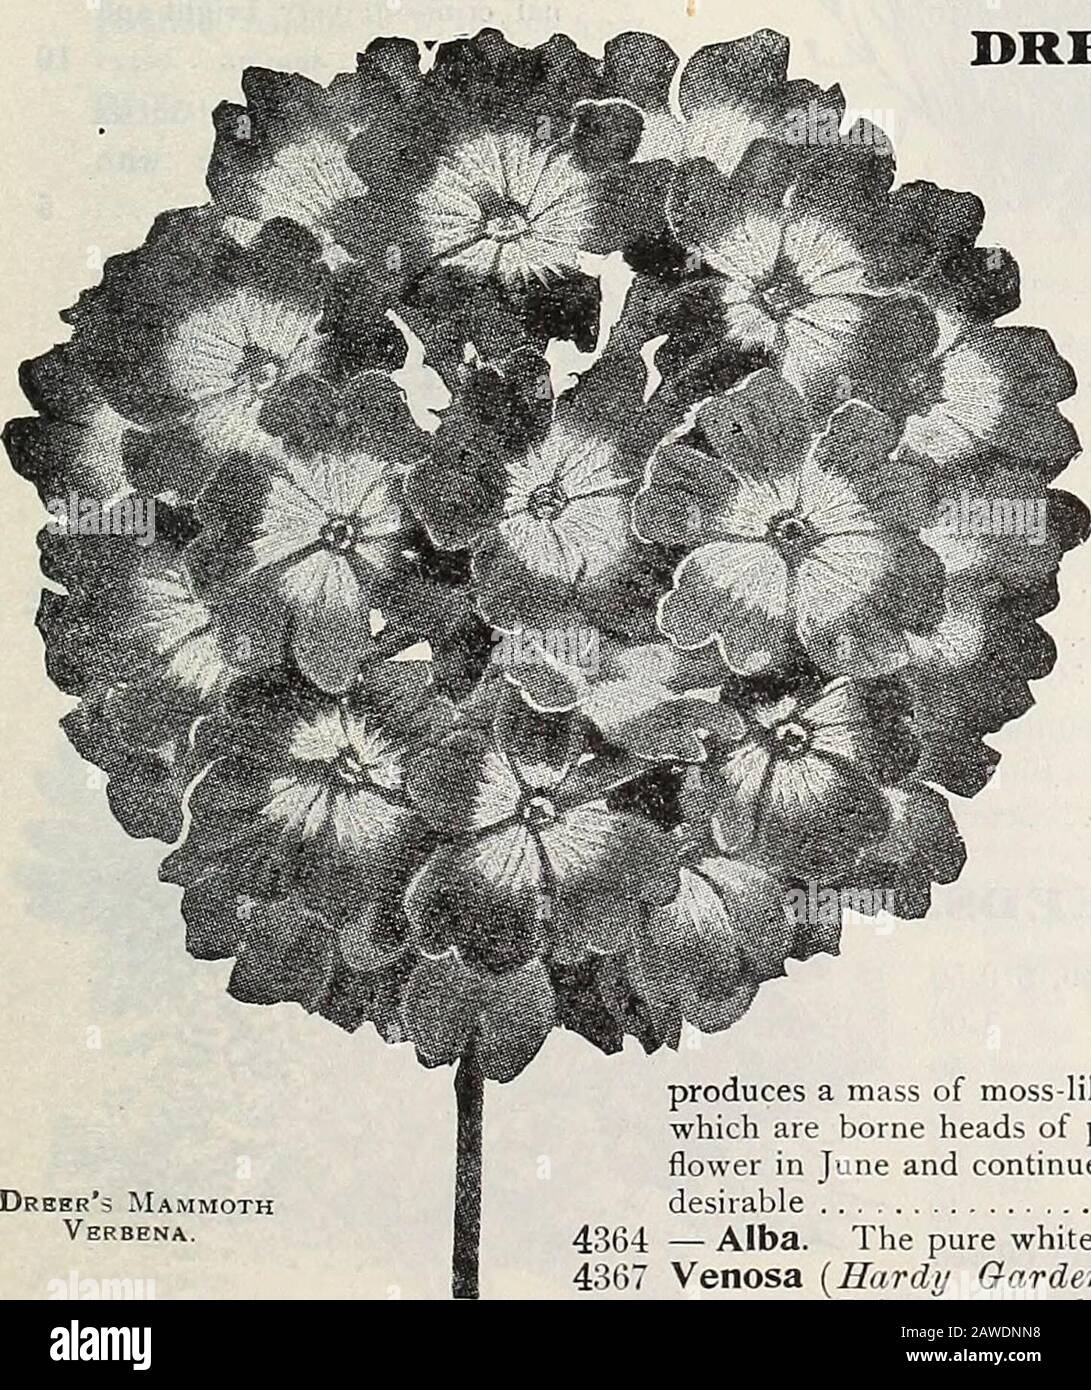 Dreer's 72nd annual edition garden book : 1910 . Tagetes Signata Pumila. TRITOMA. (Red-hot Poker, Flame Flower, orTorch Lily.) PER PKT. Thunbekgia. 4330 H y b r i d a , The introductionof new, early and continuousflowering Tritomas has giventhem a prominent place amonghardy bedding plants. It is notgenerally known that they arereadily grow-n from seed, manyflowering the first year if sownearly. The seed we offer hasbeen saved from our own col-lection, which is undoubtedlythe finest in this country. Ofcourse, for immediate results itwill be better to get plants,but raising them from seed ishigh Stock Photo